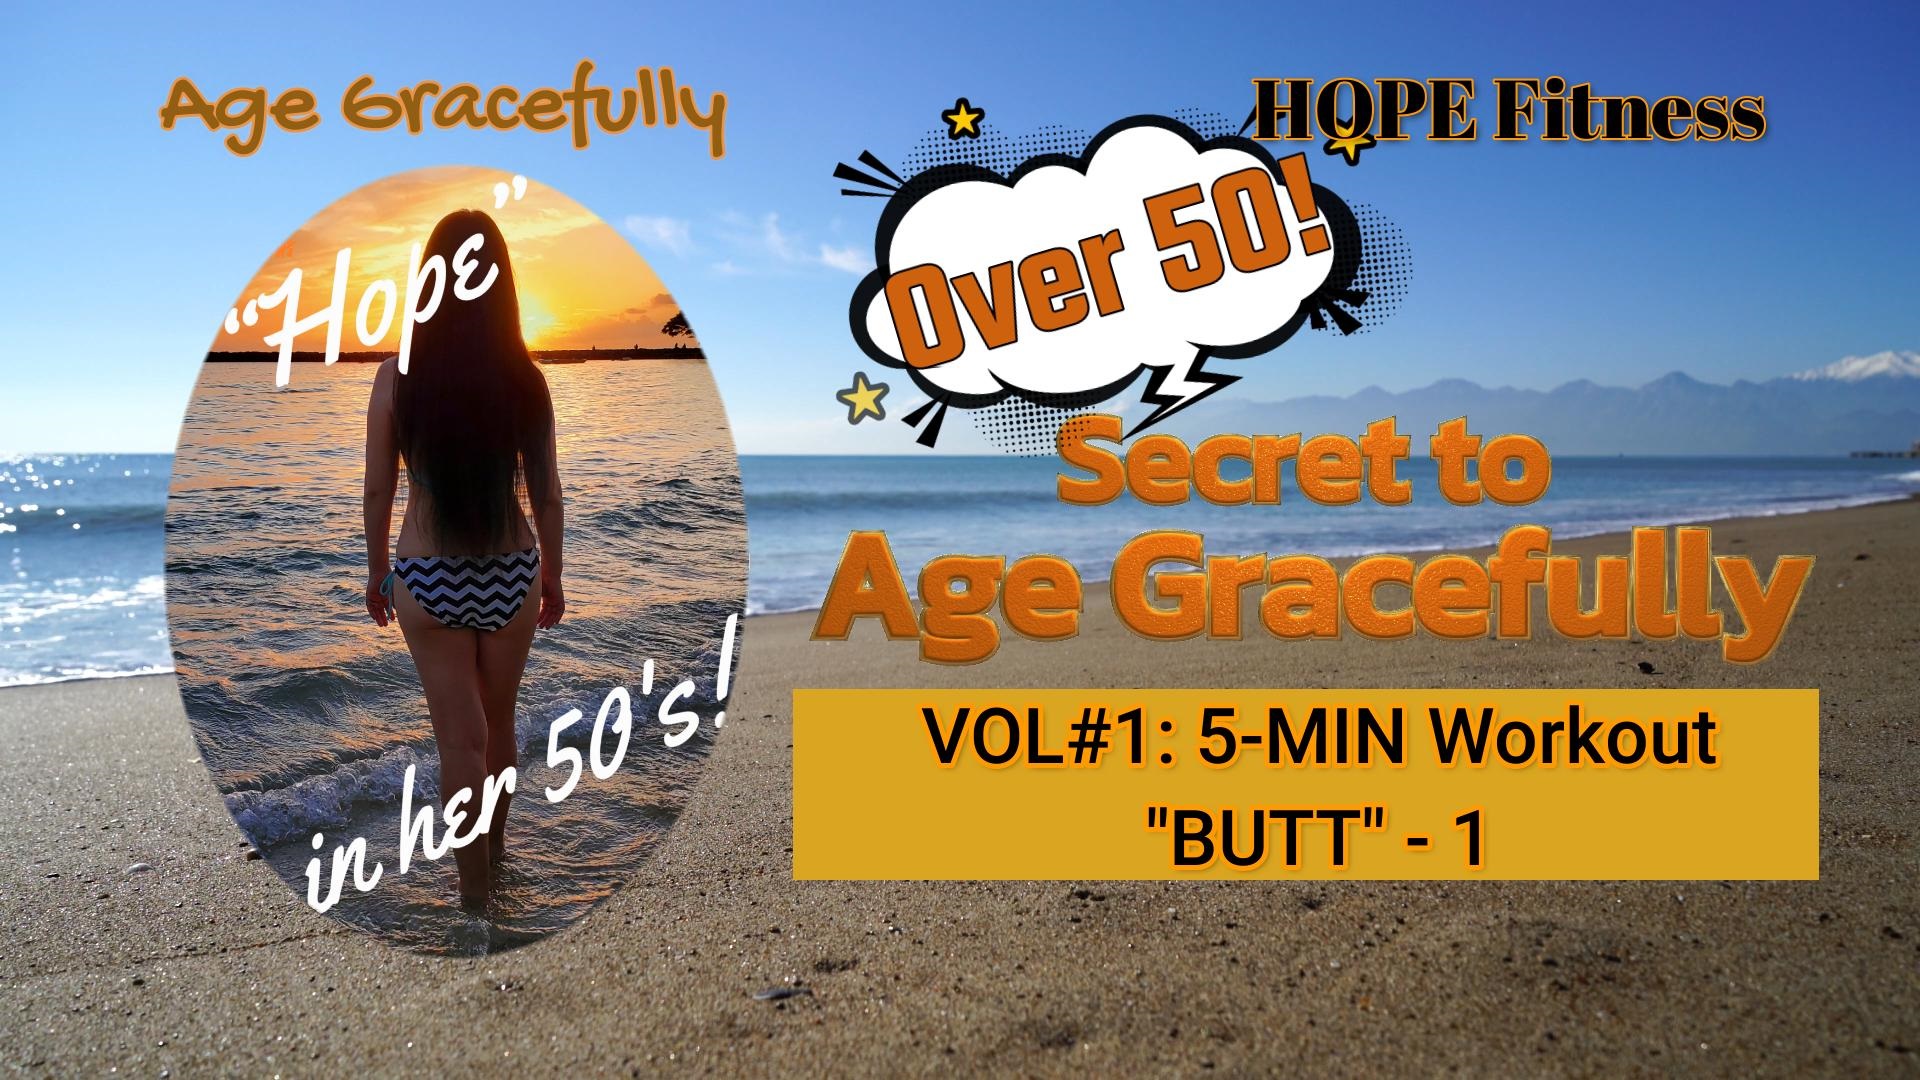 5-min BUTT home workout by Age Gracefully -- Hope Fitness